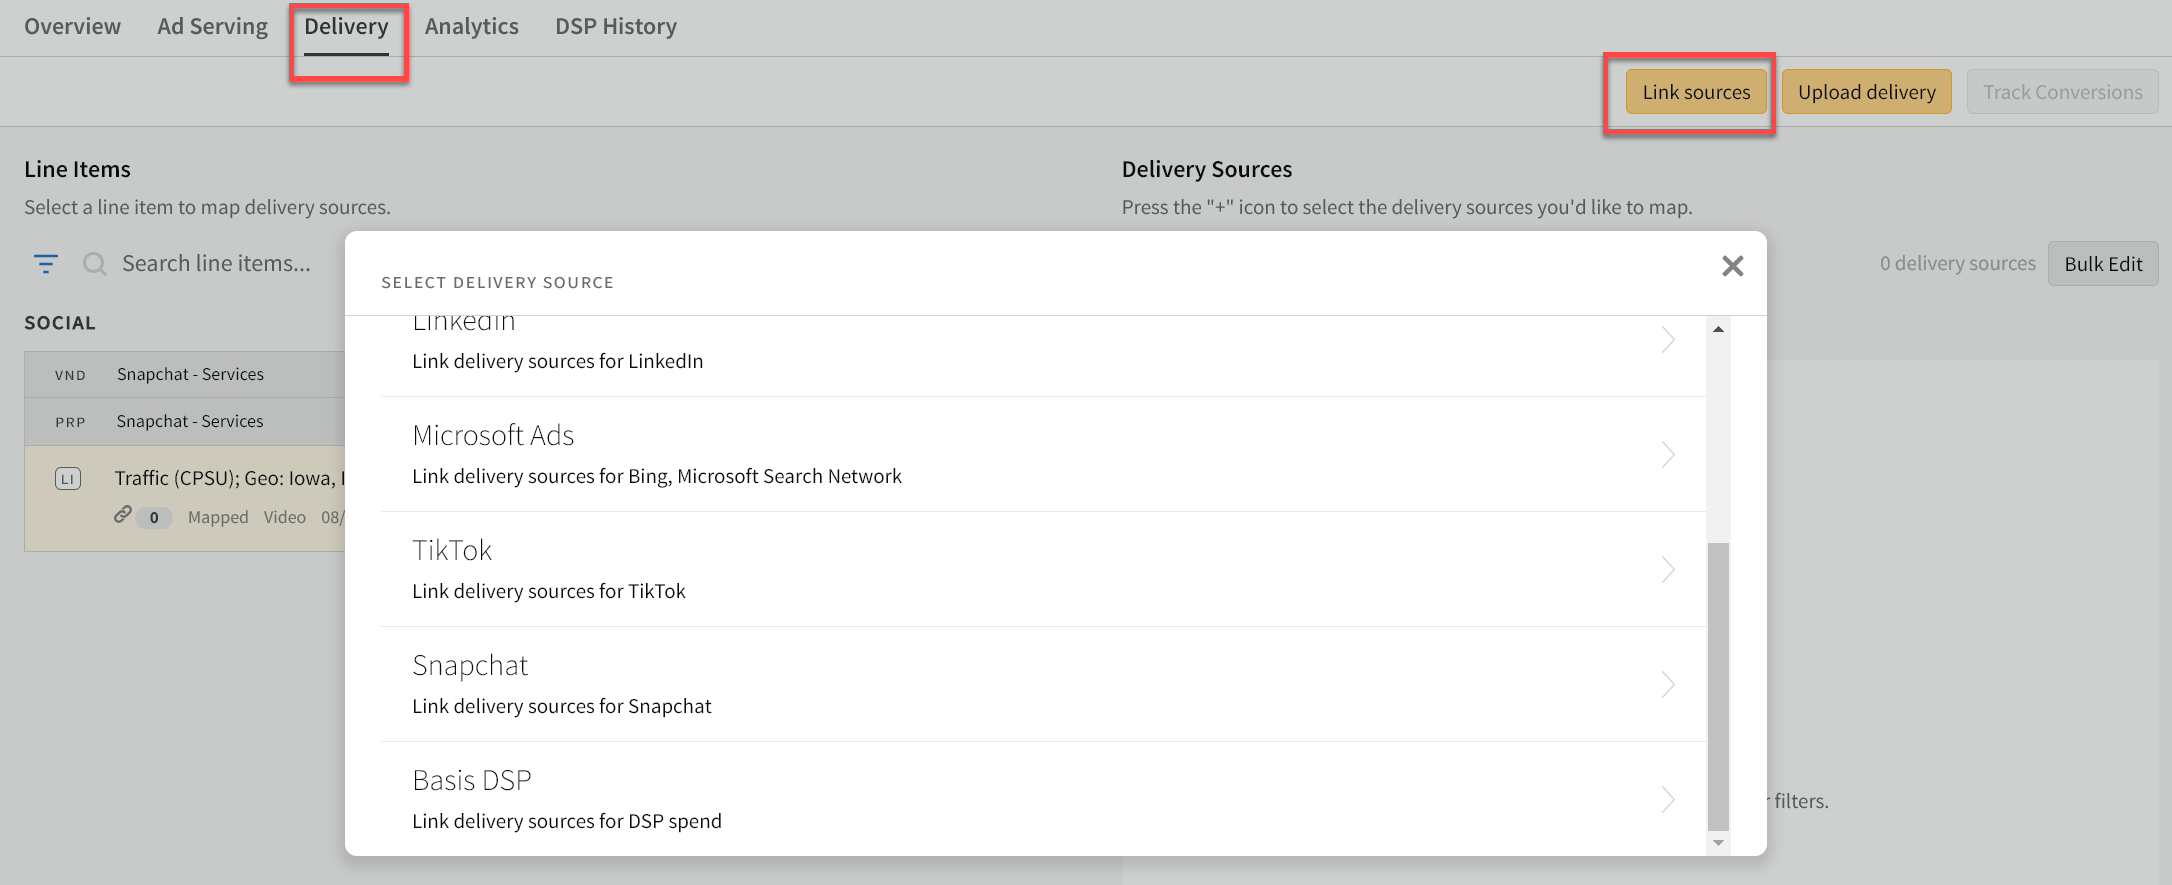 Select Delivery Source modal over the Campaign Delivery tab with the Delivery tab and Link sourcecs button highlighted.